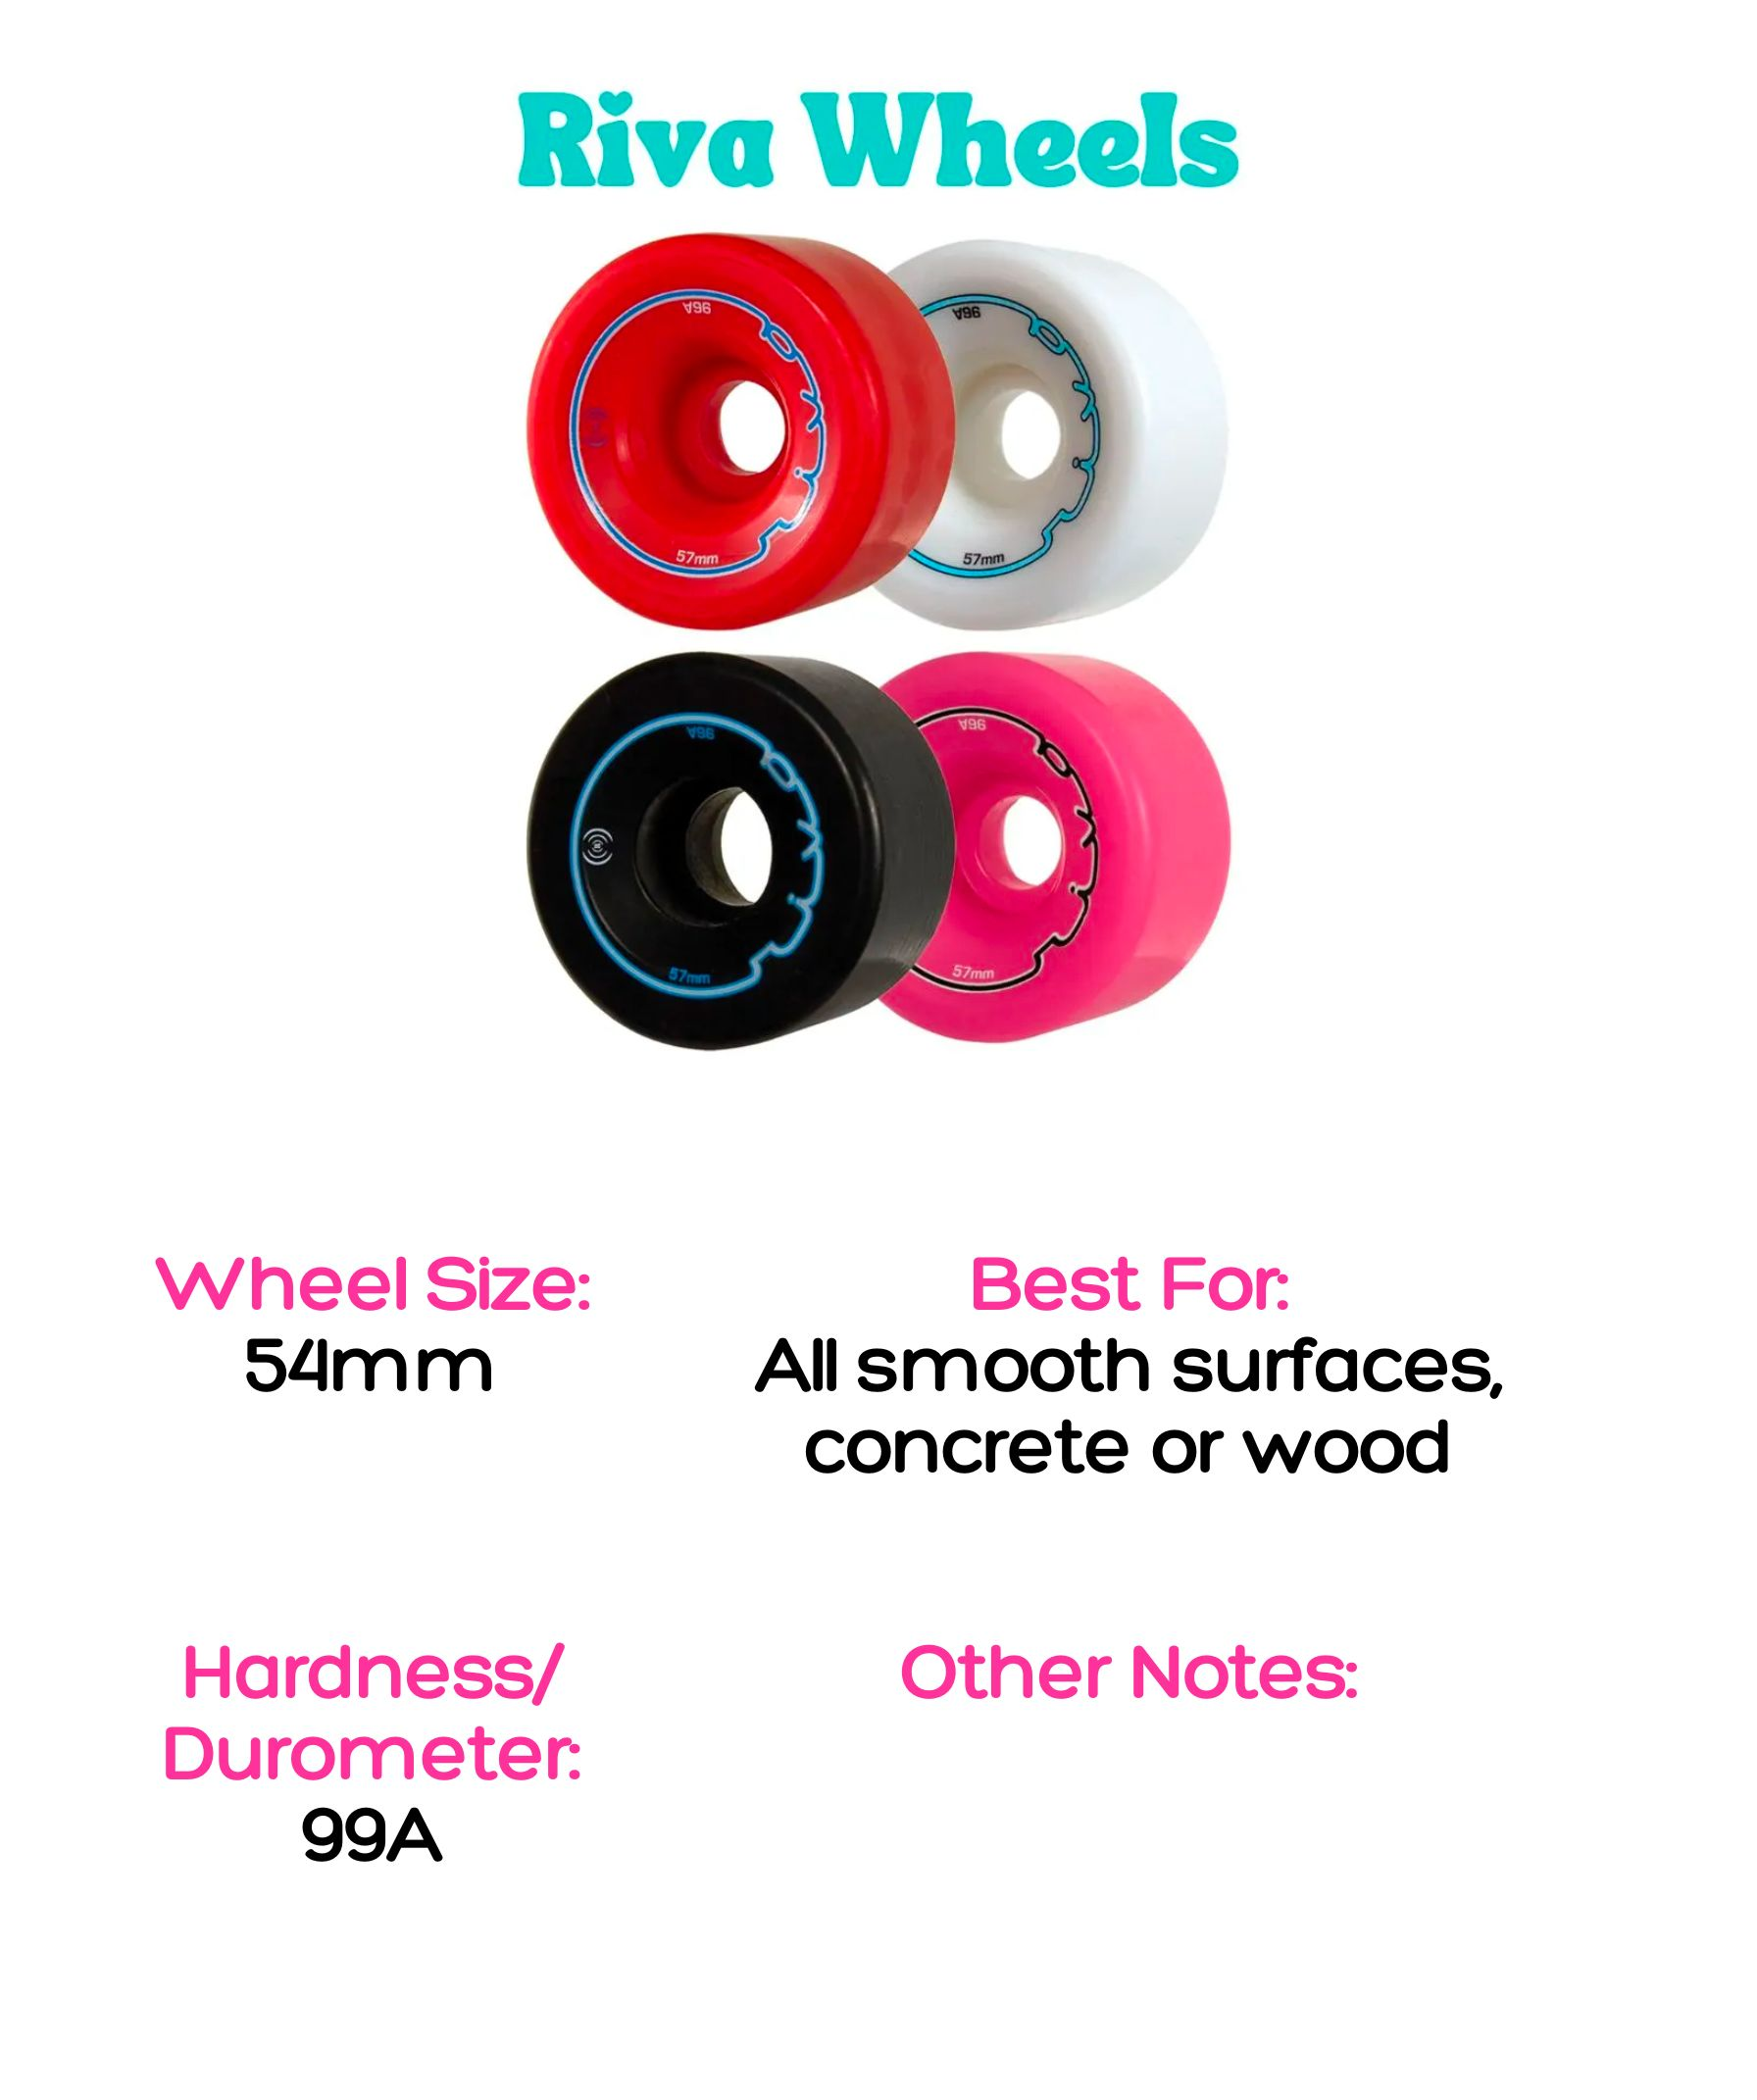 riva wheels, 54mm, 99A hardness, best for all smooth surfaces, concrete or wood